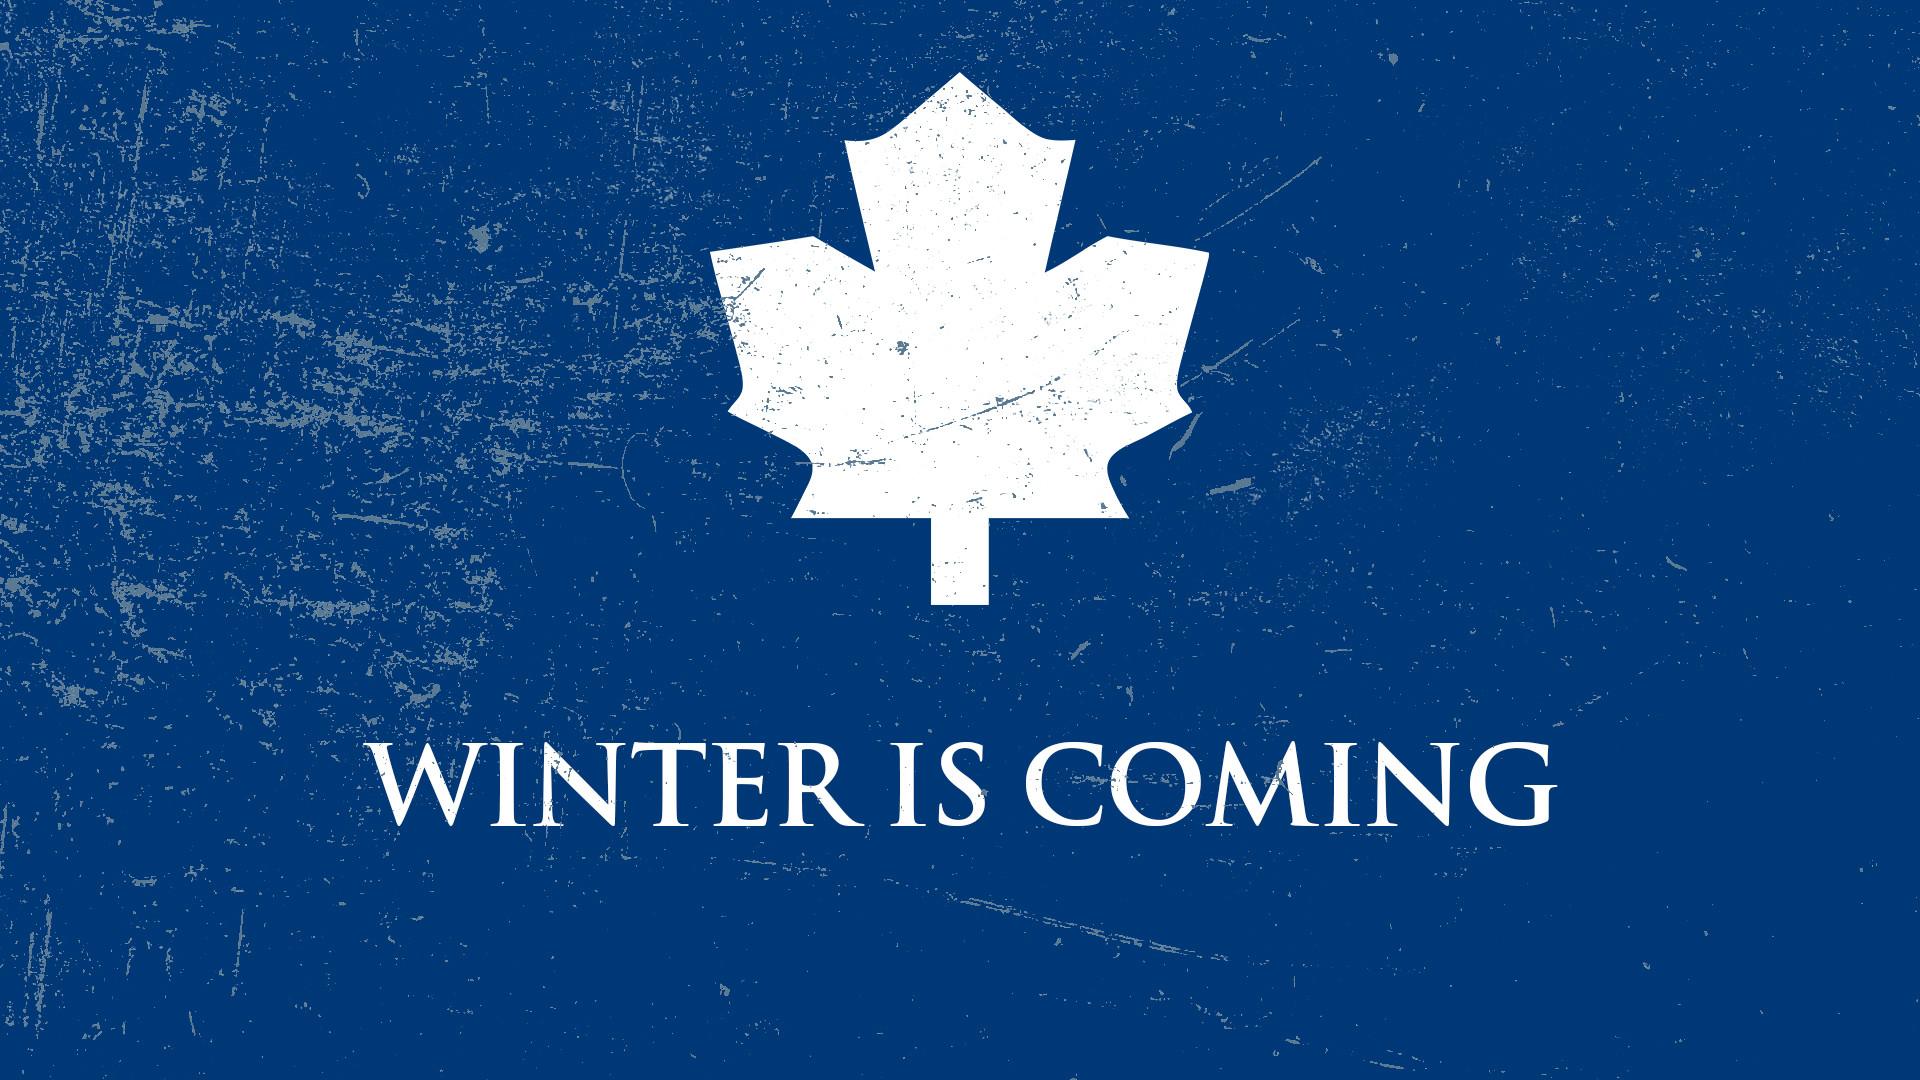 Maple Leaf Live Wallpaper - Toronto Maple Leafs Winter Is Coming - HD Wallpaper 